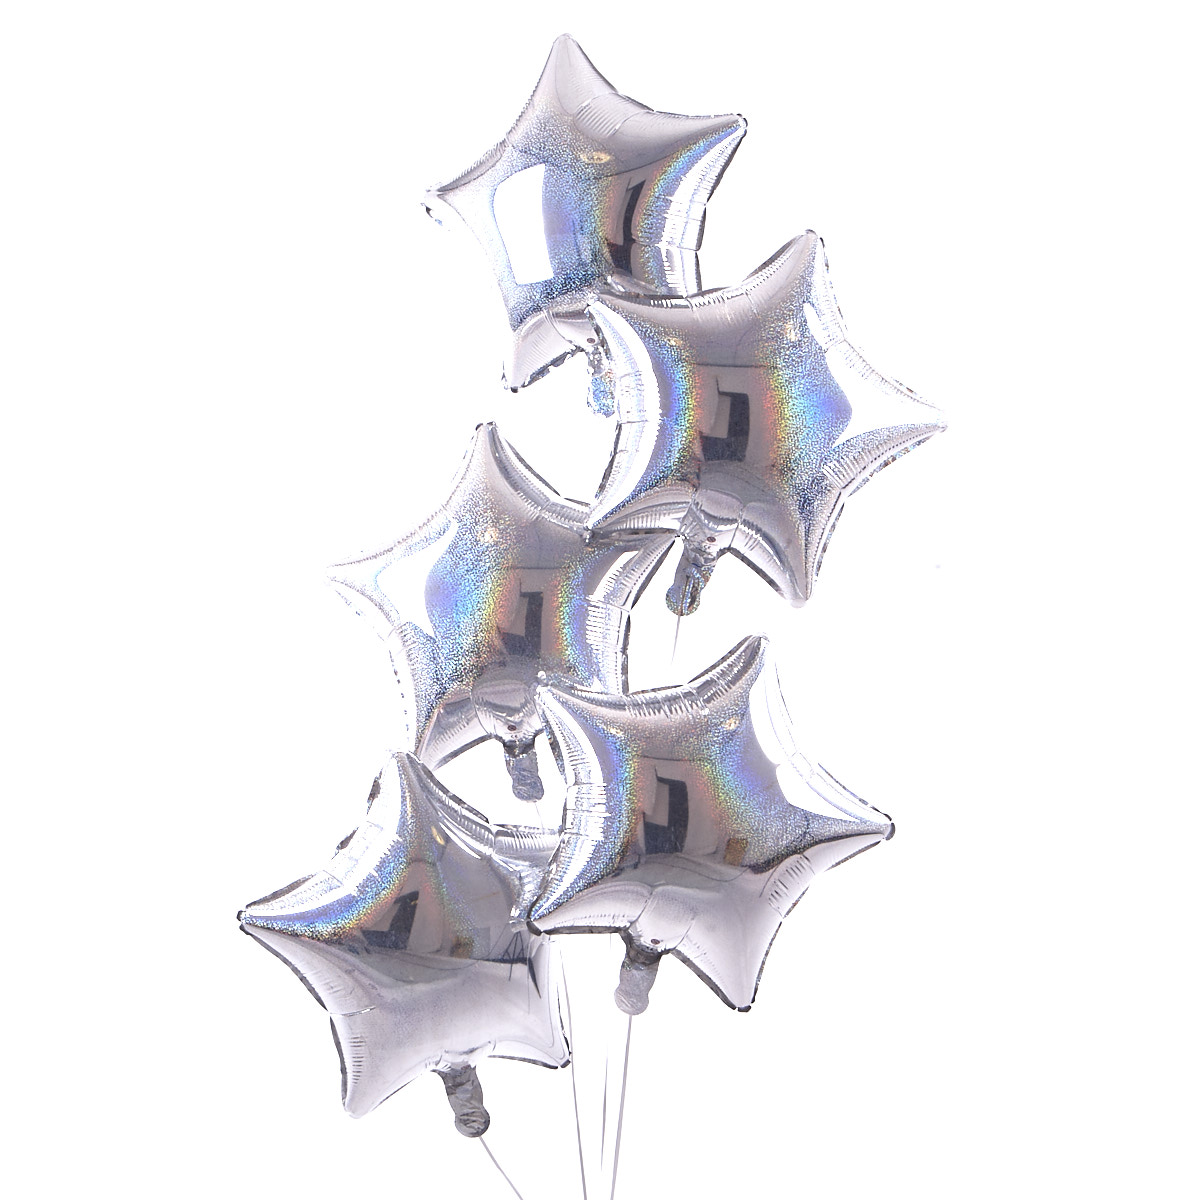 5 Silver Stars Balloon Bouquet - DELIVERED INFLATED!